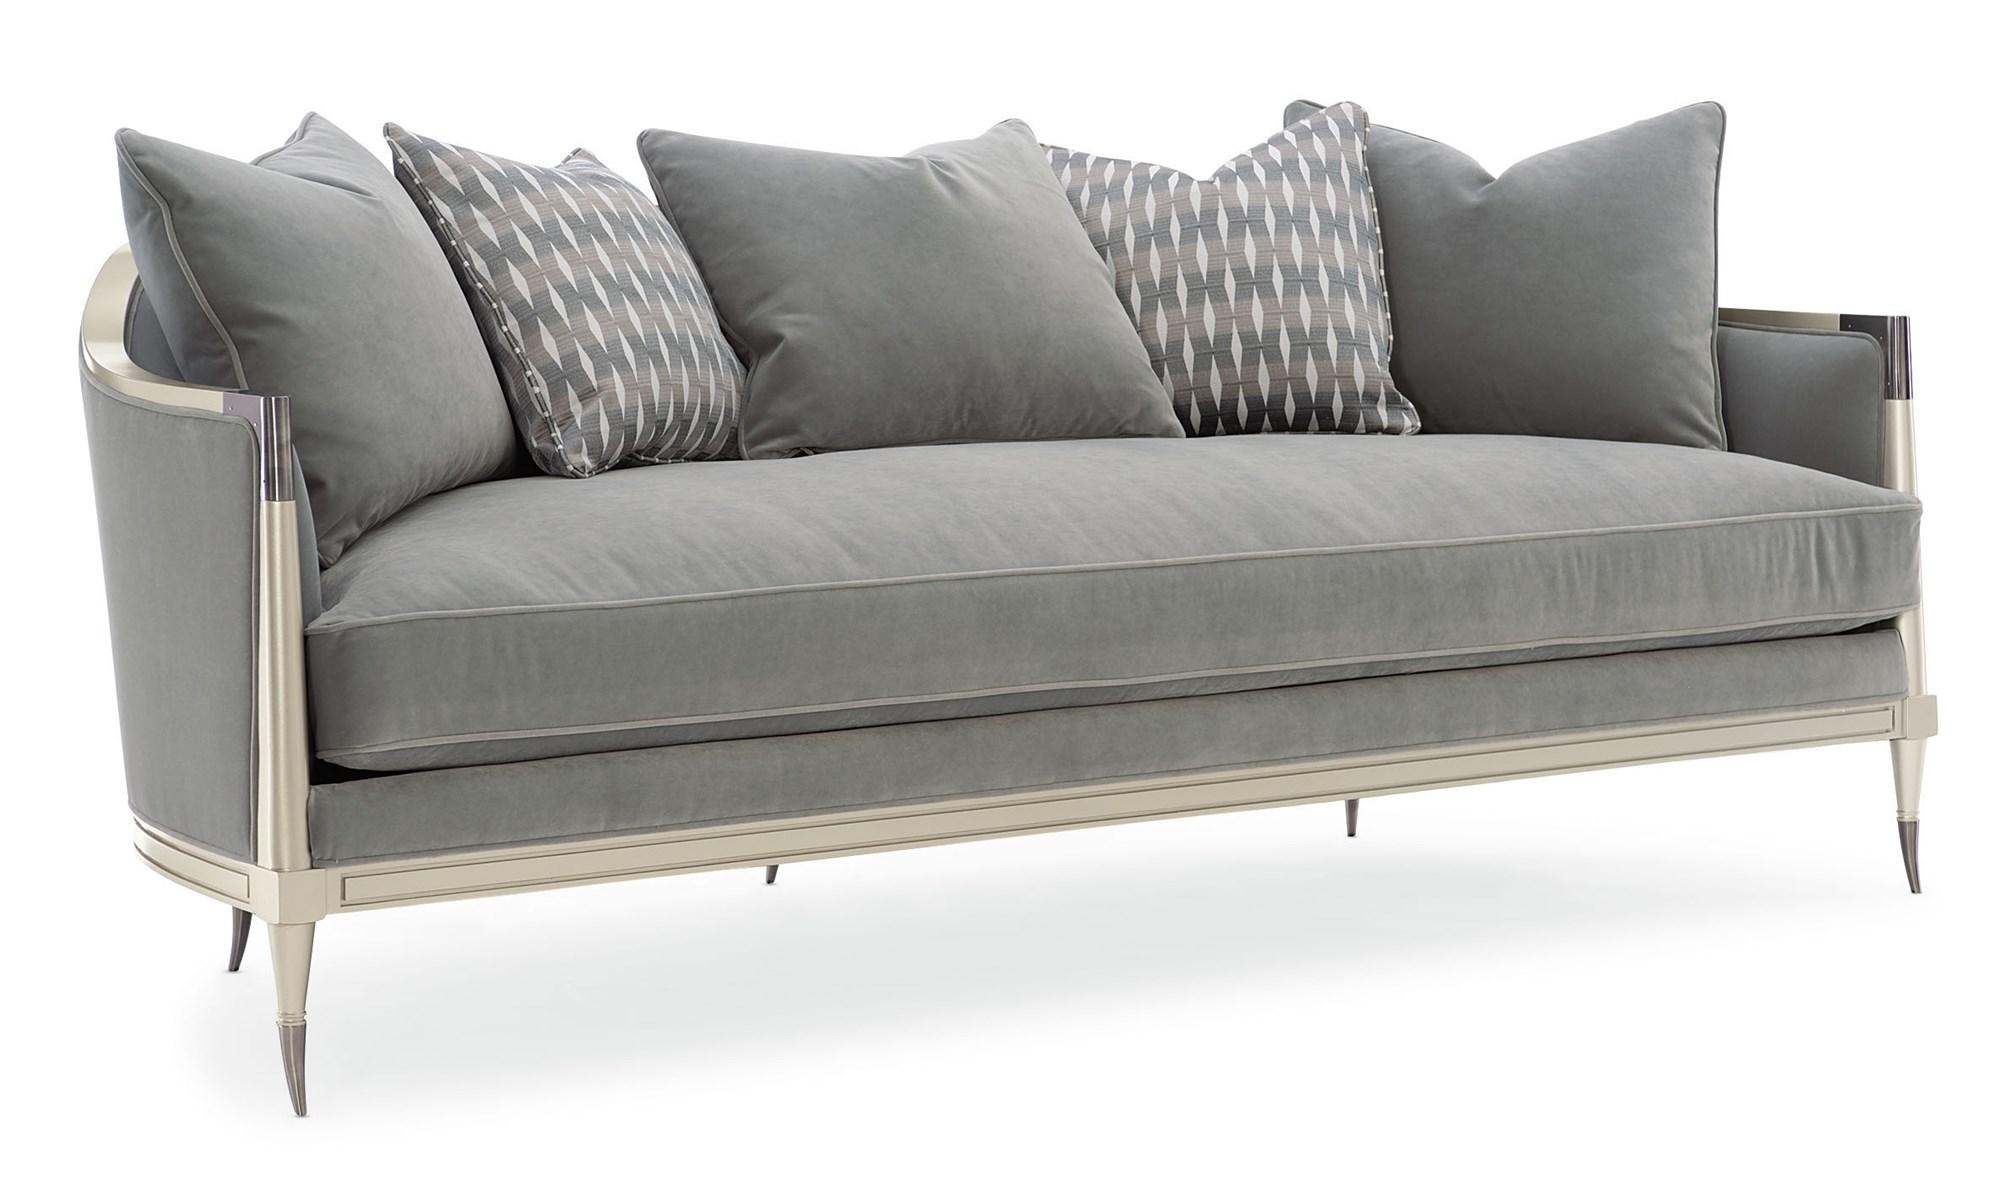 Traditional Sofa SPLASH OF FLASH UPH-420-112-A in Silver, Gray Fabric